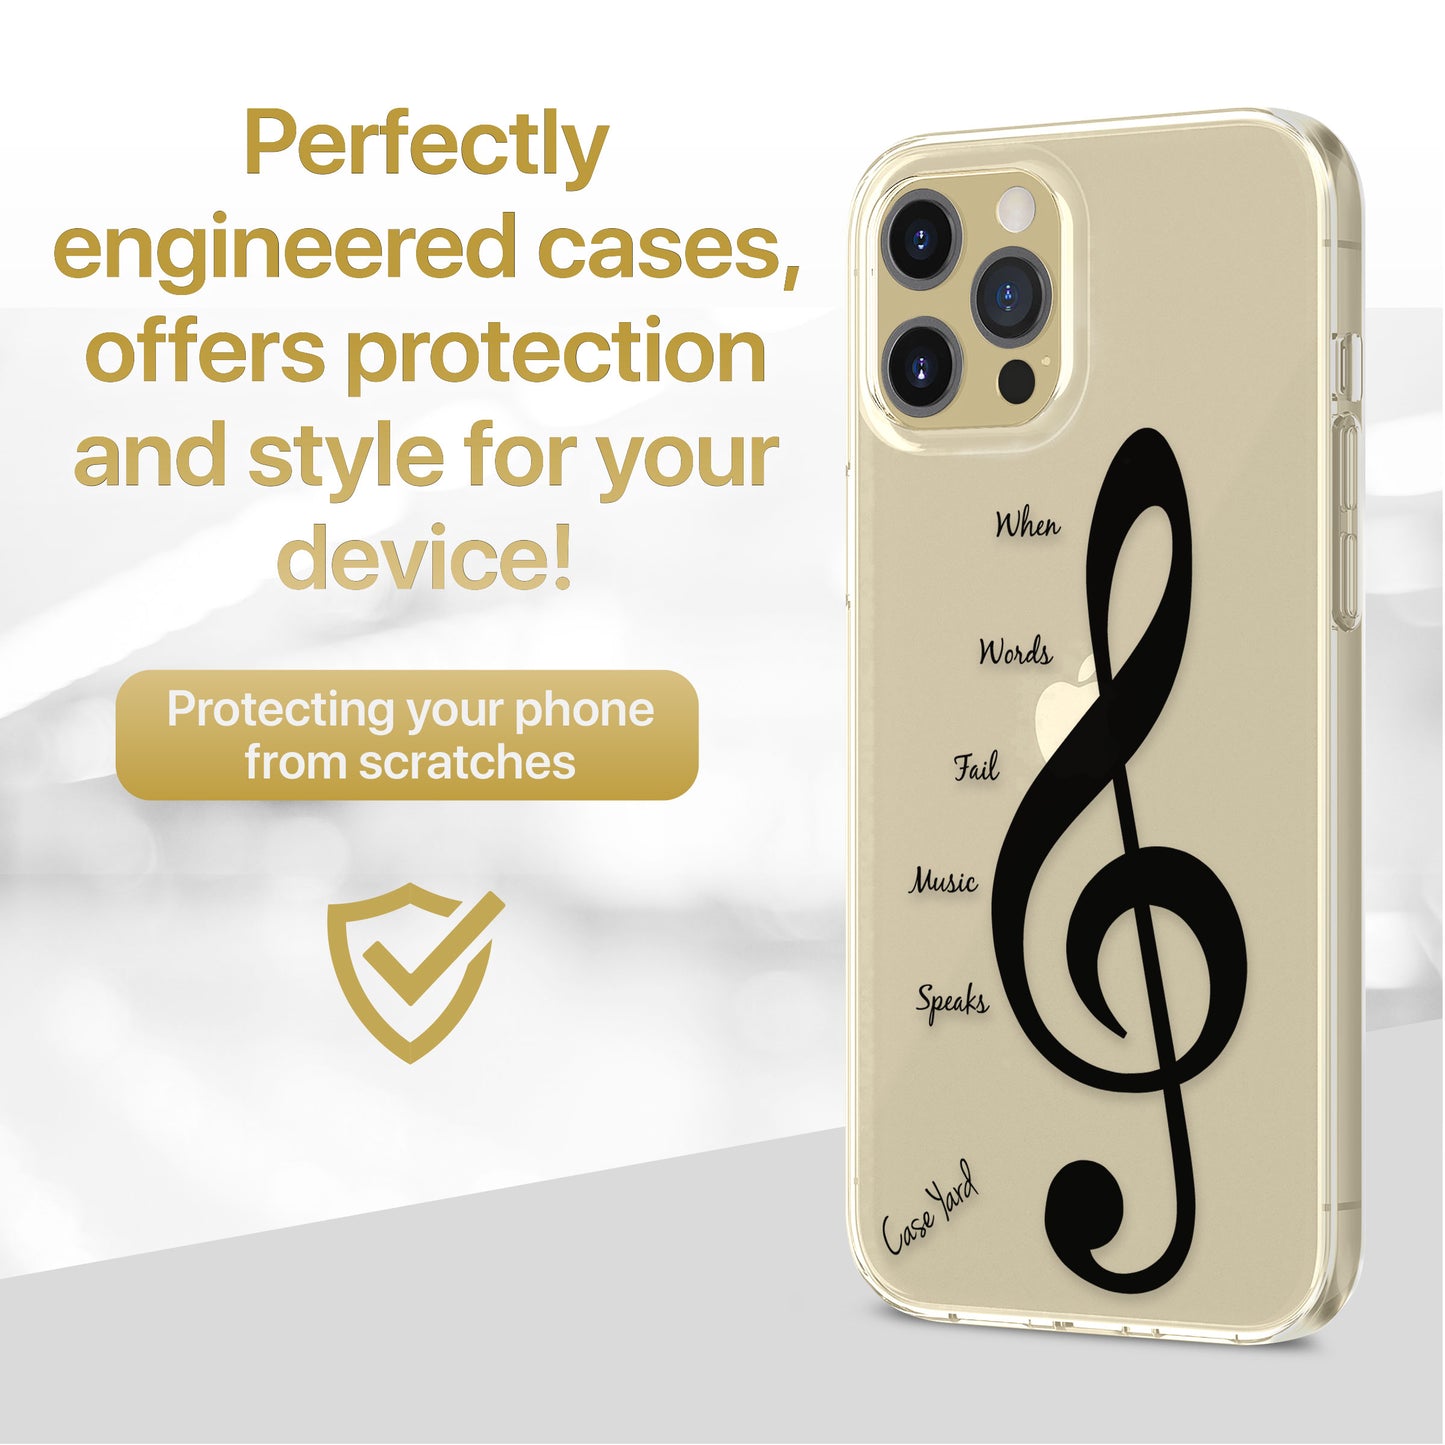 TPU Case Clear case with (Music 1) Design for iPhone & Samsung Phones